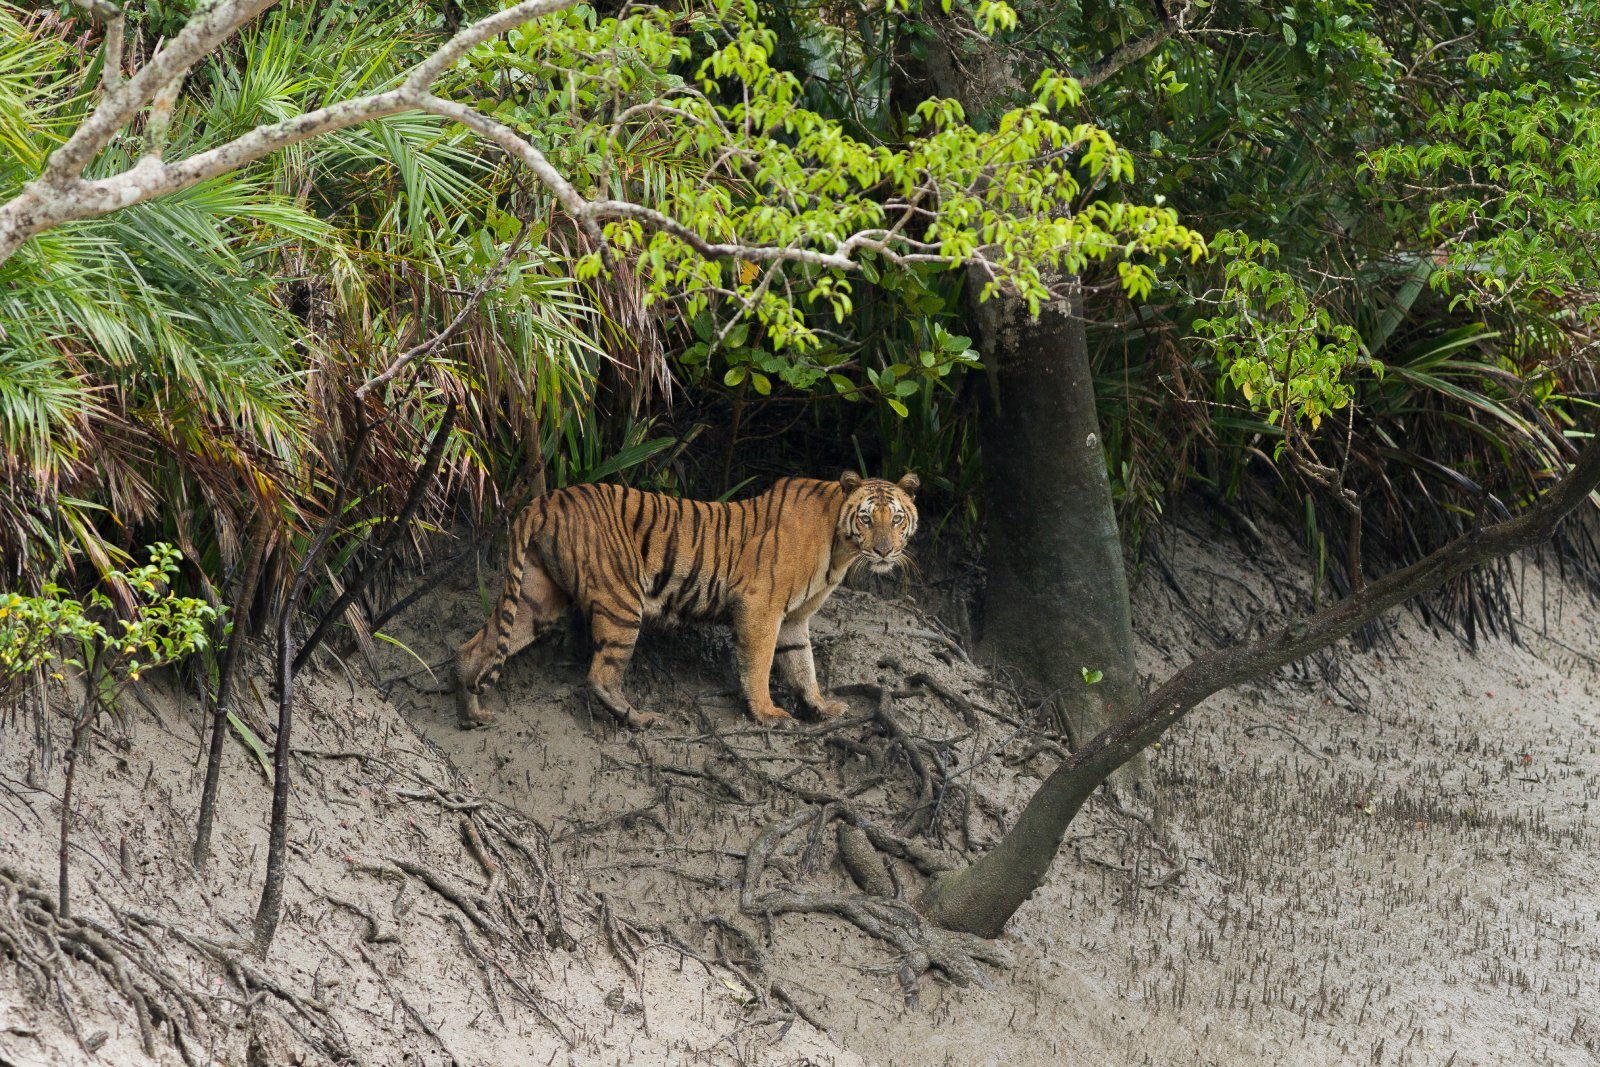 <p class="wp-caption-text">Image Credit: Shutterstock / Soumyajit Nandy</p>  <p><span>Sundarbans National Park, a UNESCO World Heritage Site, is the world’s largest tidal halophytic mangrove forest, sprawling across India and Bangladesh. This unique ecosystem is home to the Royal Bengal Tiger, which has adapted to an aquatic lifestyle, with sightings more elusive due to the dense mangrove cover. The park also shelters various bird species, saltwater crocodiles, and the endangered Ganges river dolphin. Boat safaris through the network of tidal waterways offer the chance to explore this biodiverse habitat, providing a different perspective on wildlife viewing.</span></p>